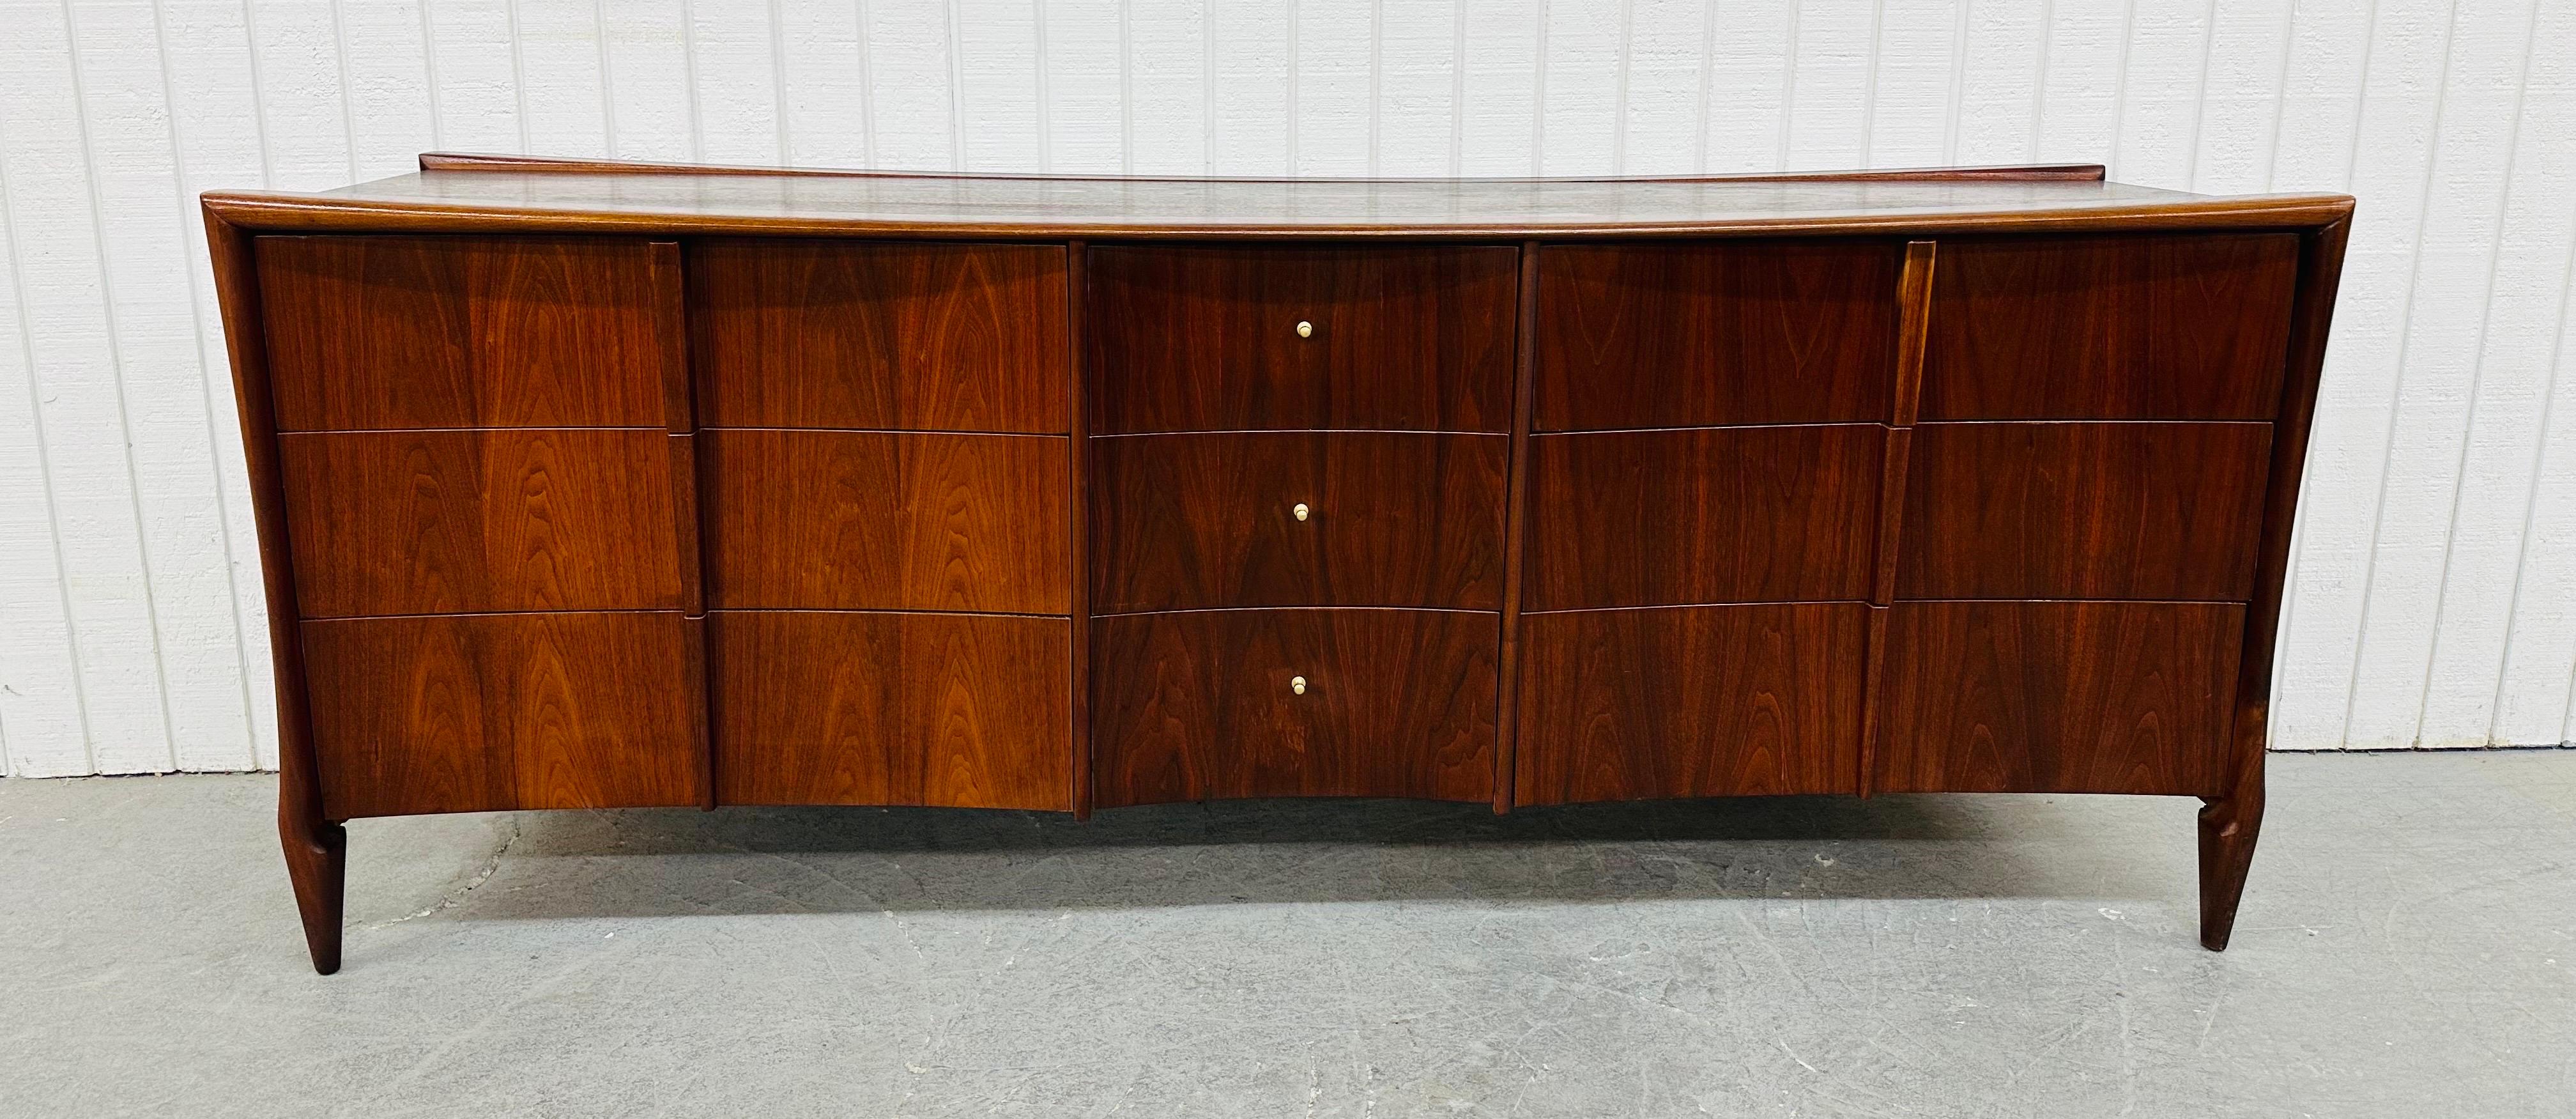 This listing is for a Mid-Century Modern Sculptural Walnut Triple Dresser. Featuring a straight line design, three large drawers on each end with sculpted wood pulls, three smaller drawers in the center with original brass hardware, sculpted modern